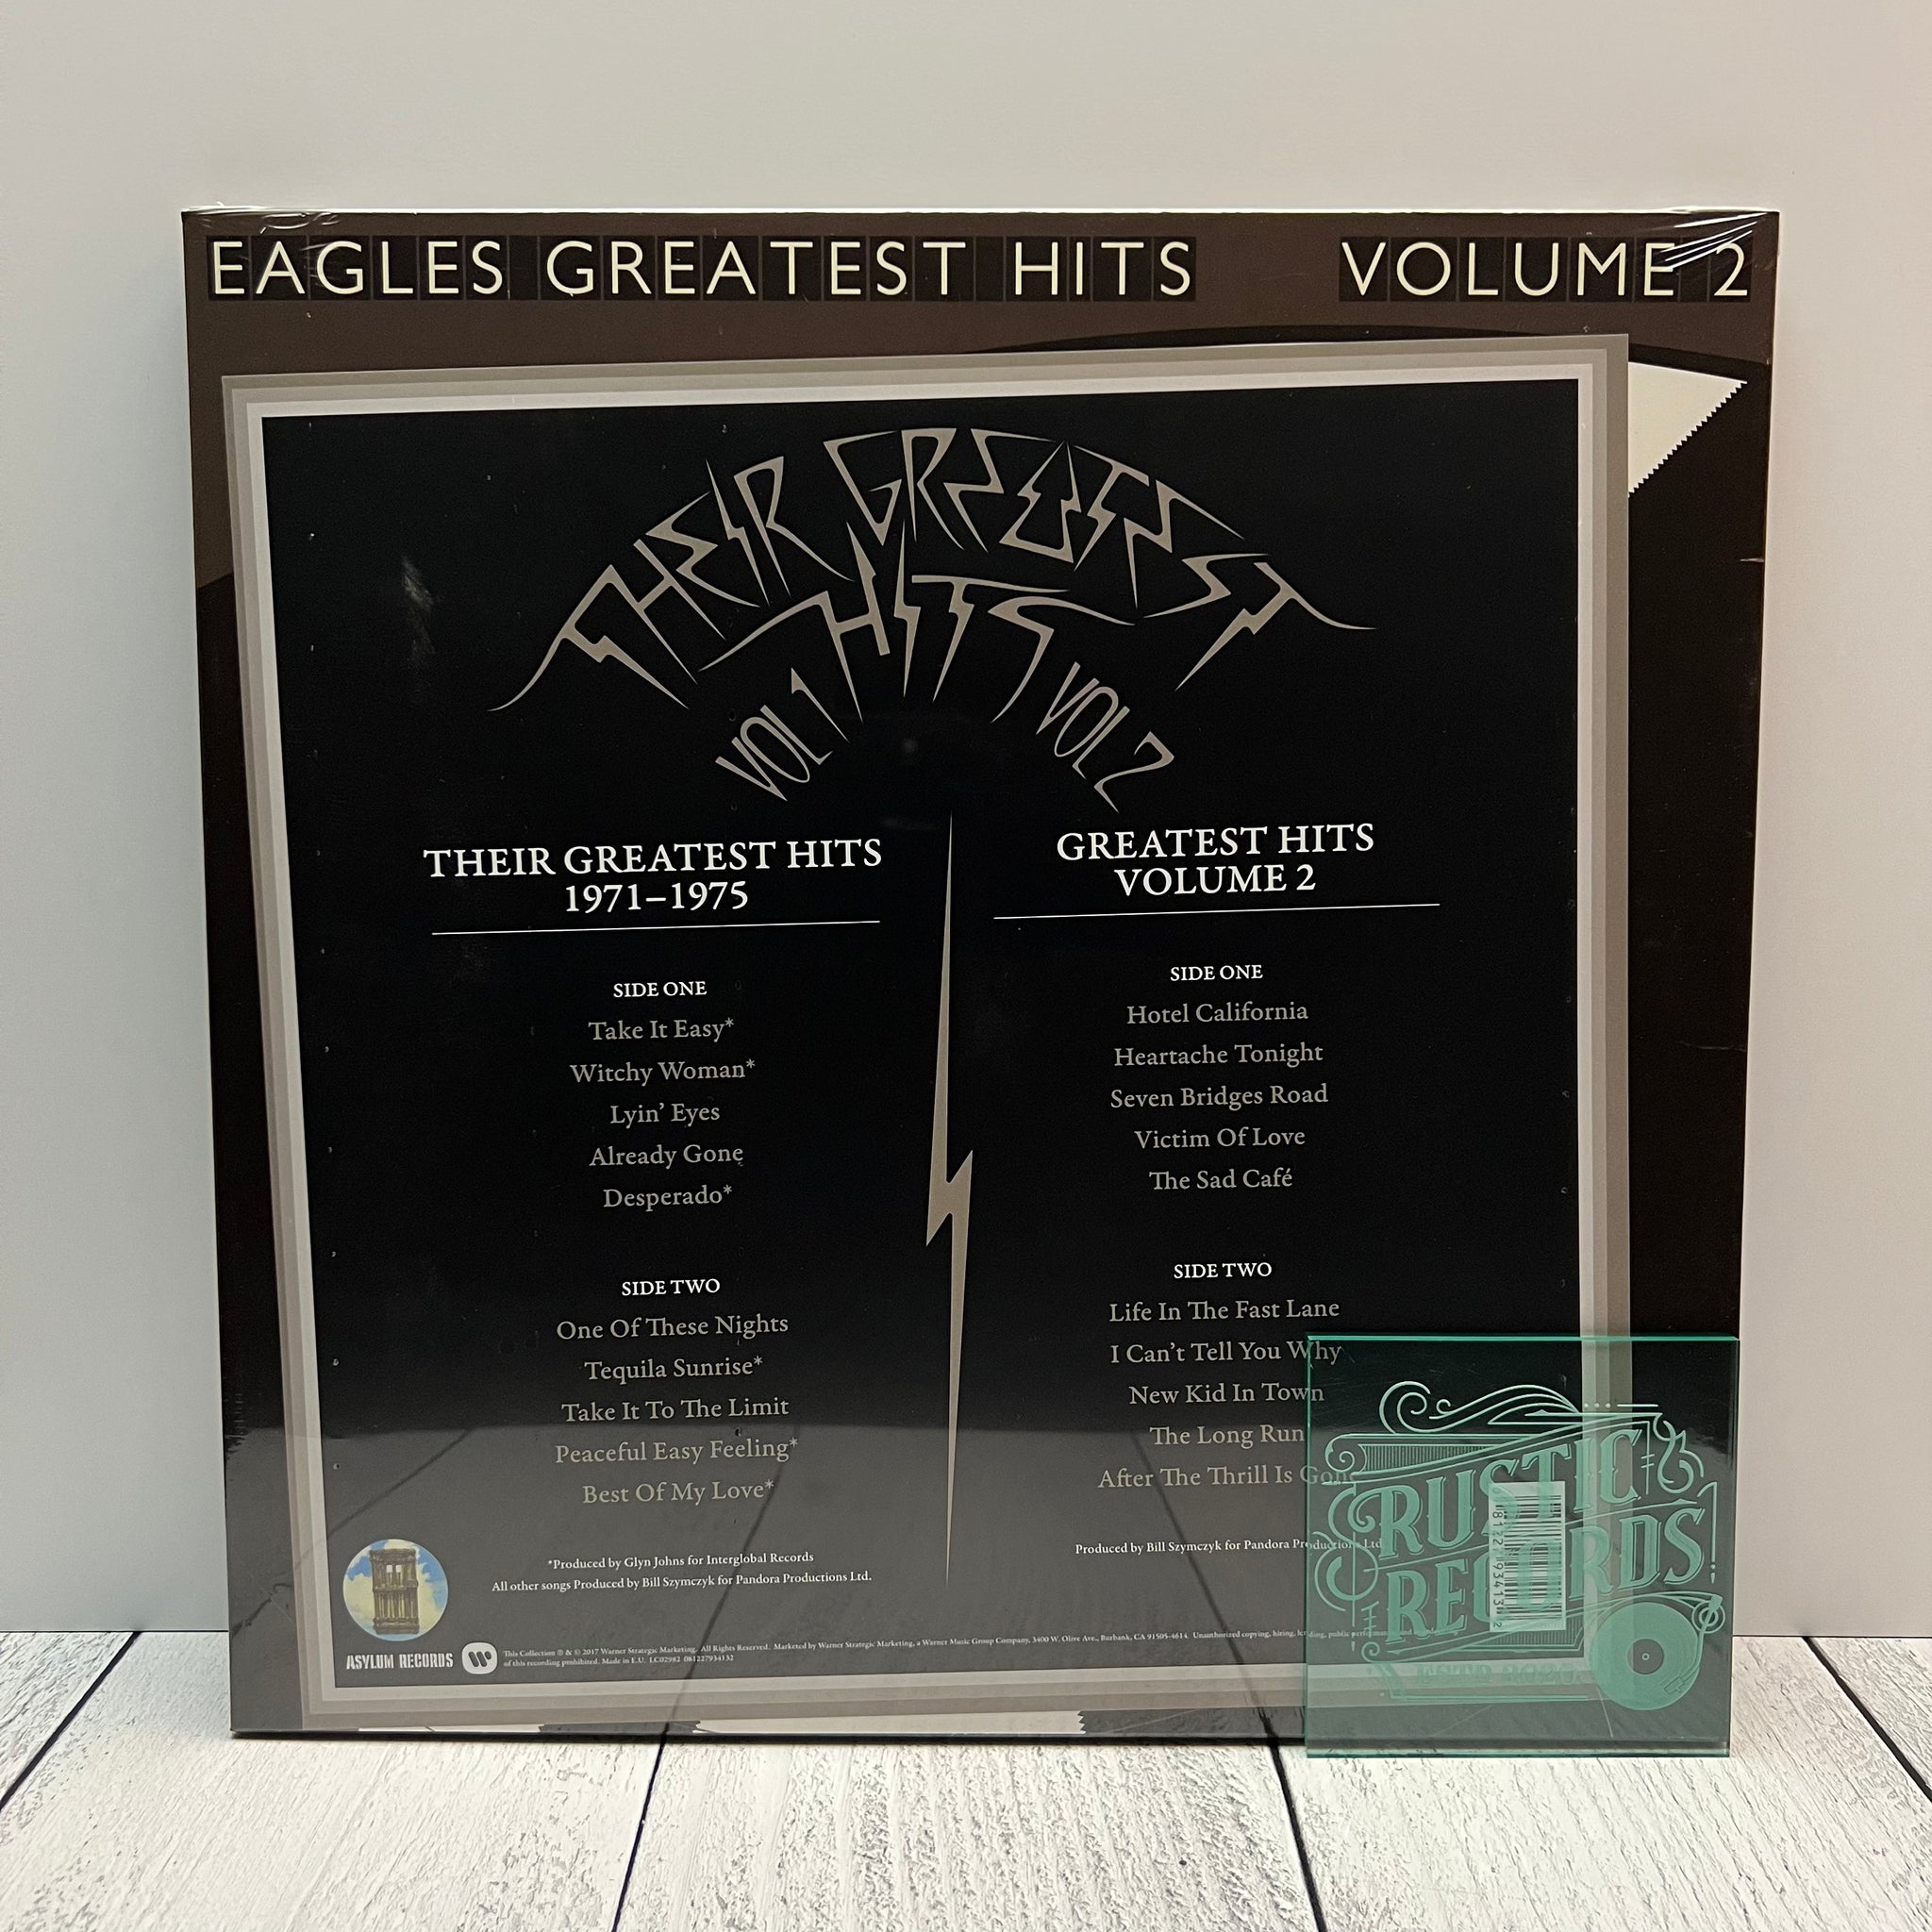 The Eagles - Their Greatest Hits: Volumes 1 & 2